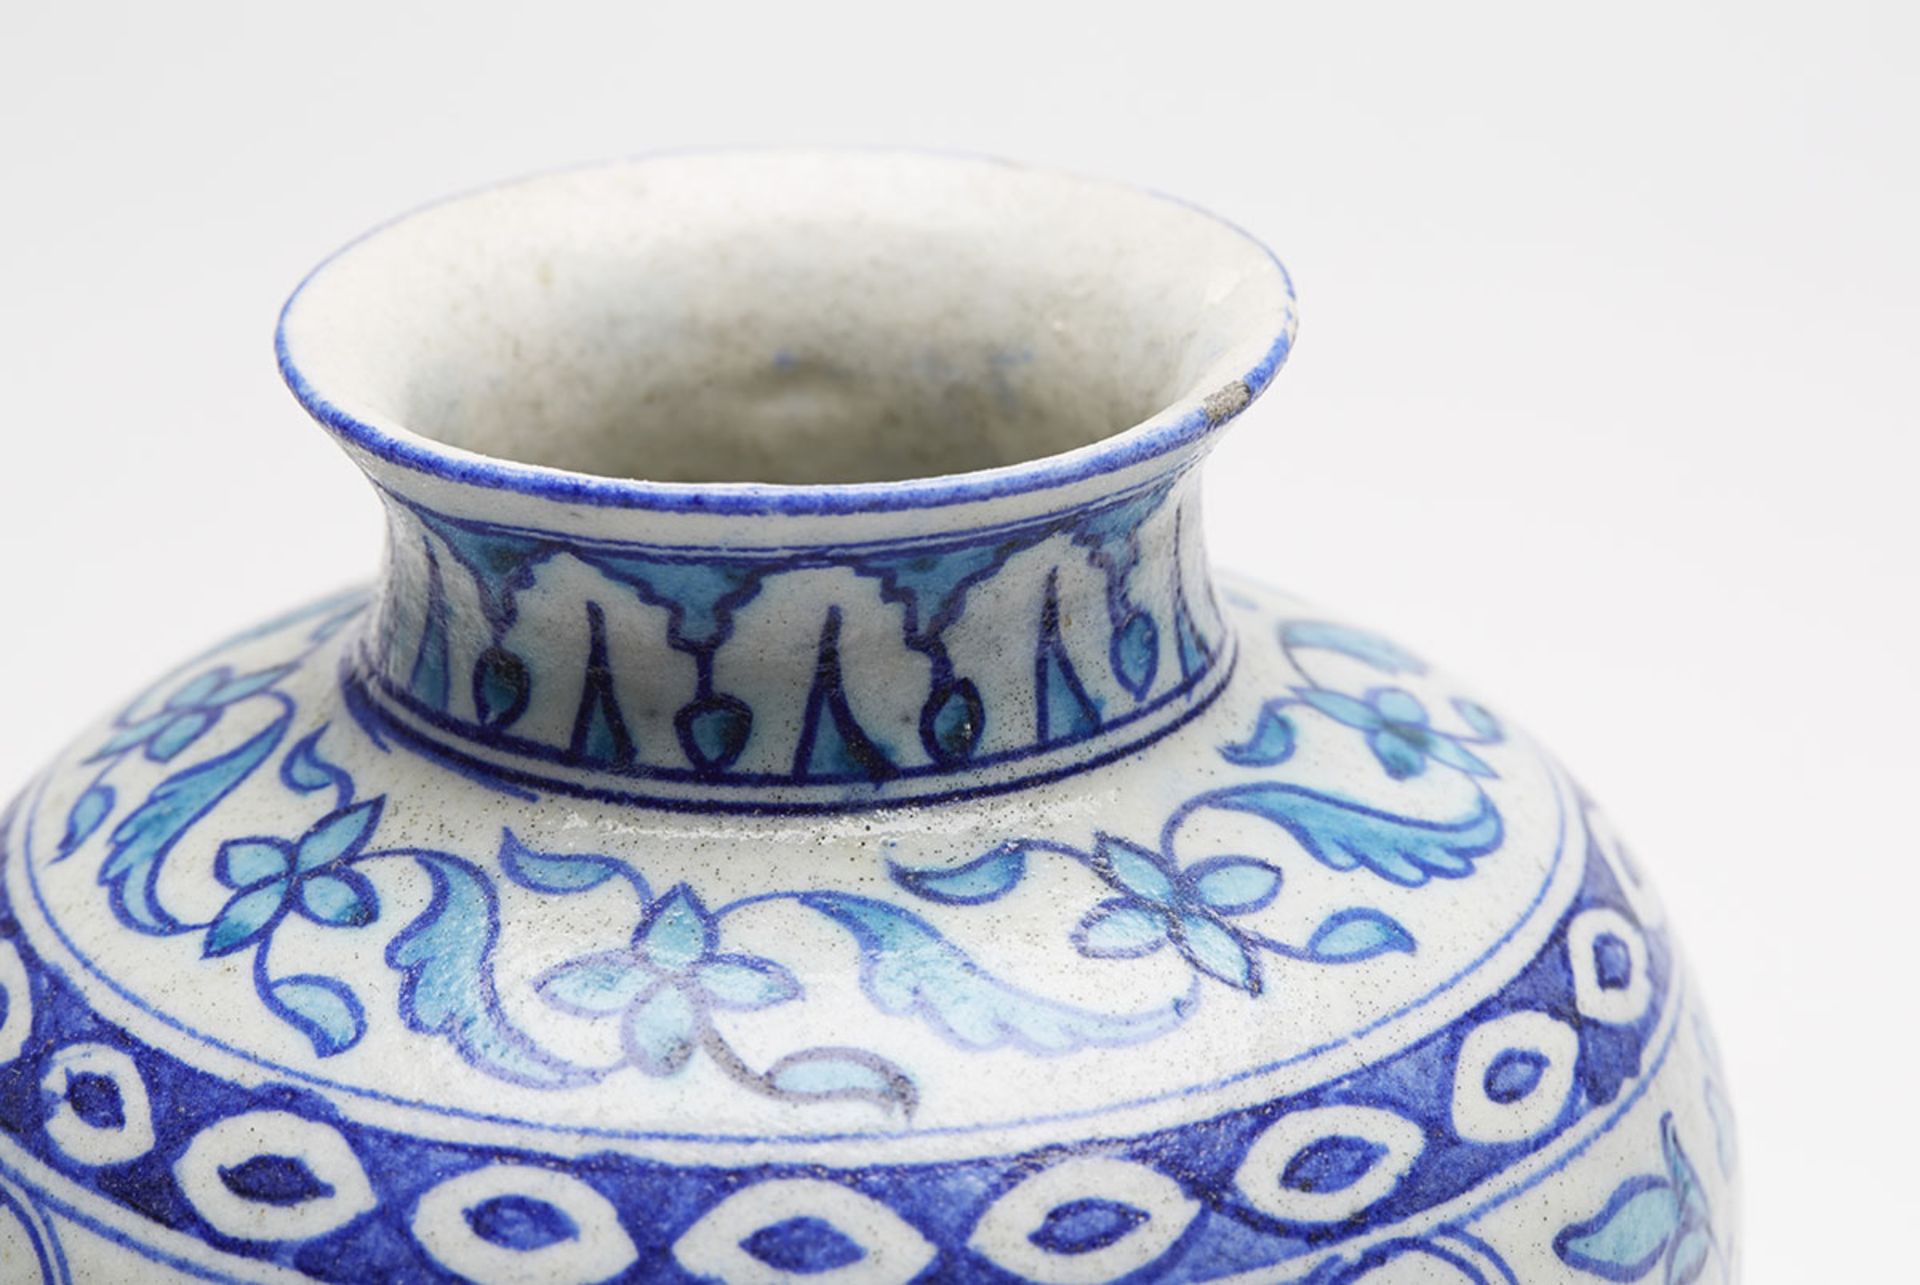 ANTIQUE MIDDLE EASTERN/INDIAN BLUE & WHITE VASE 19TH C.   DIMENSIONS   Height 13,5cm, Diameter 14, - Image 5 of 9